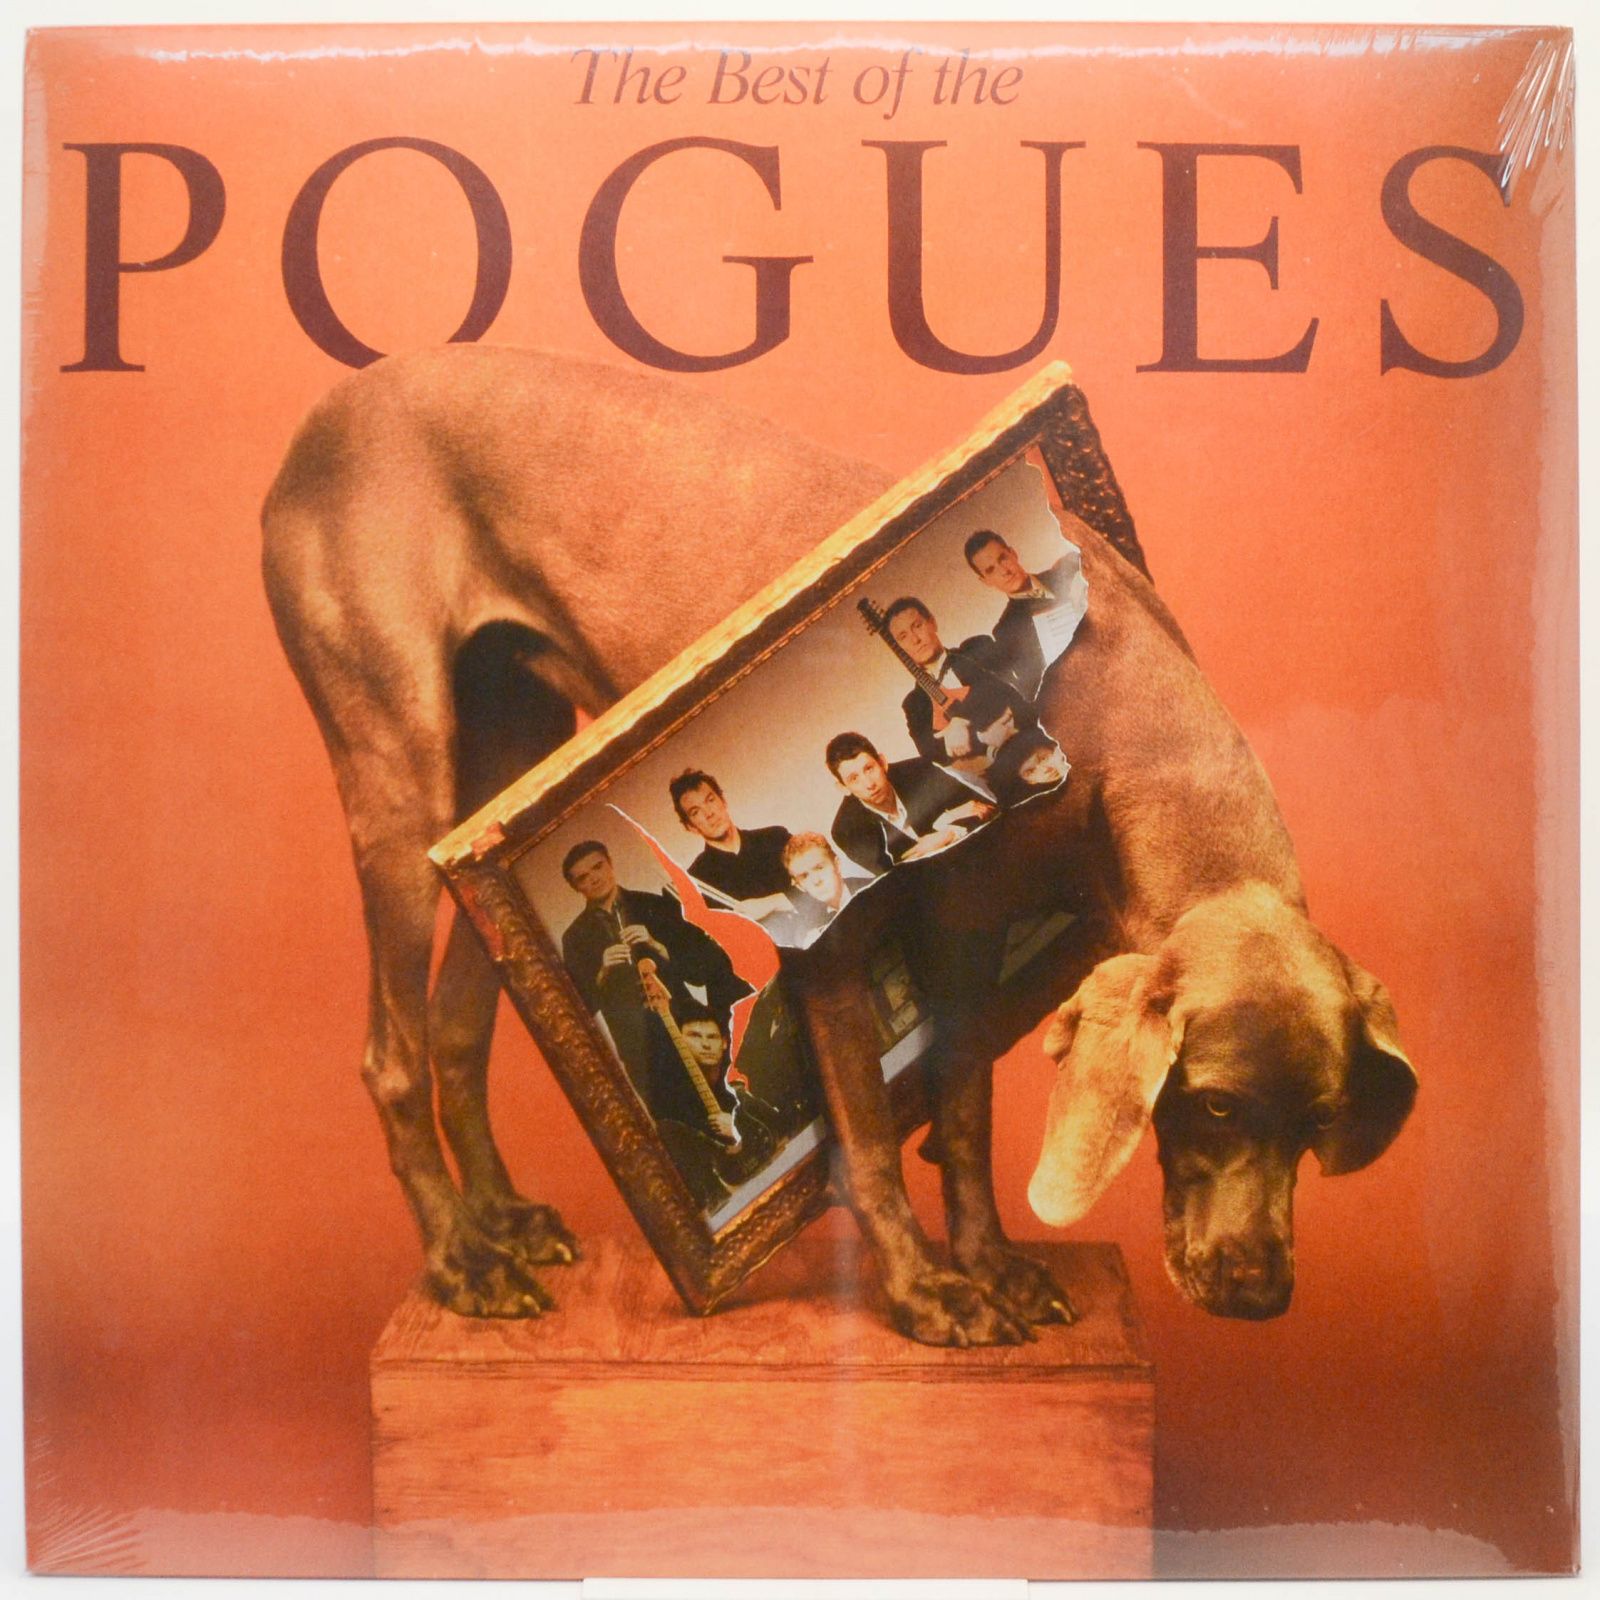 The Best Of The Pogues, 1991